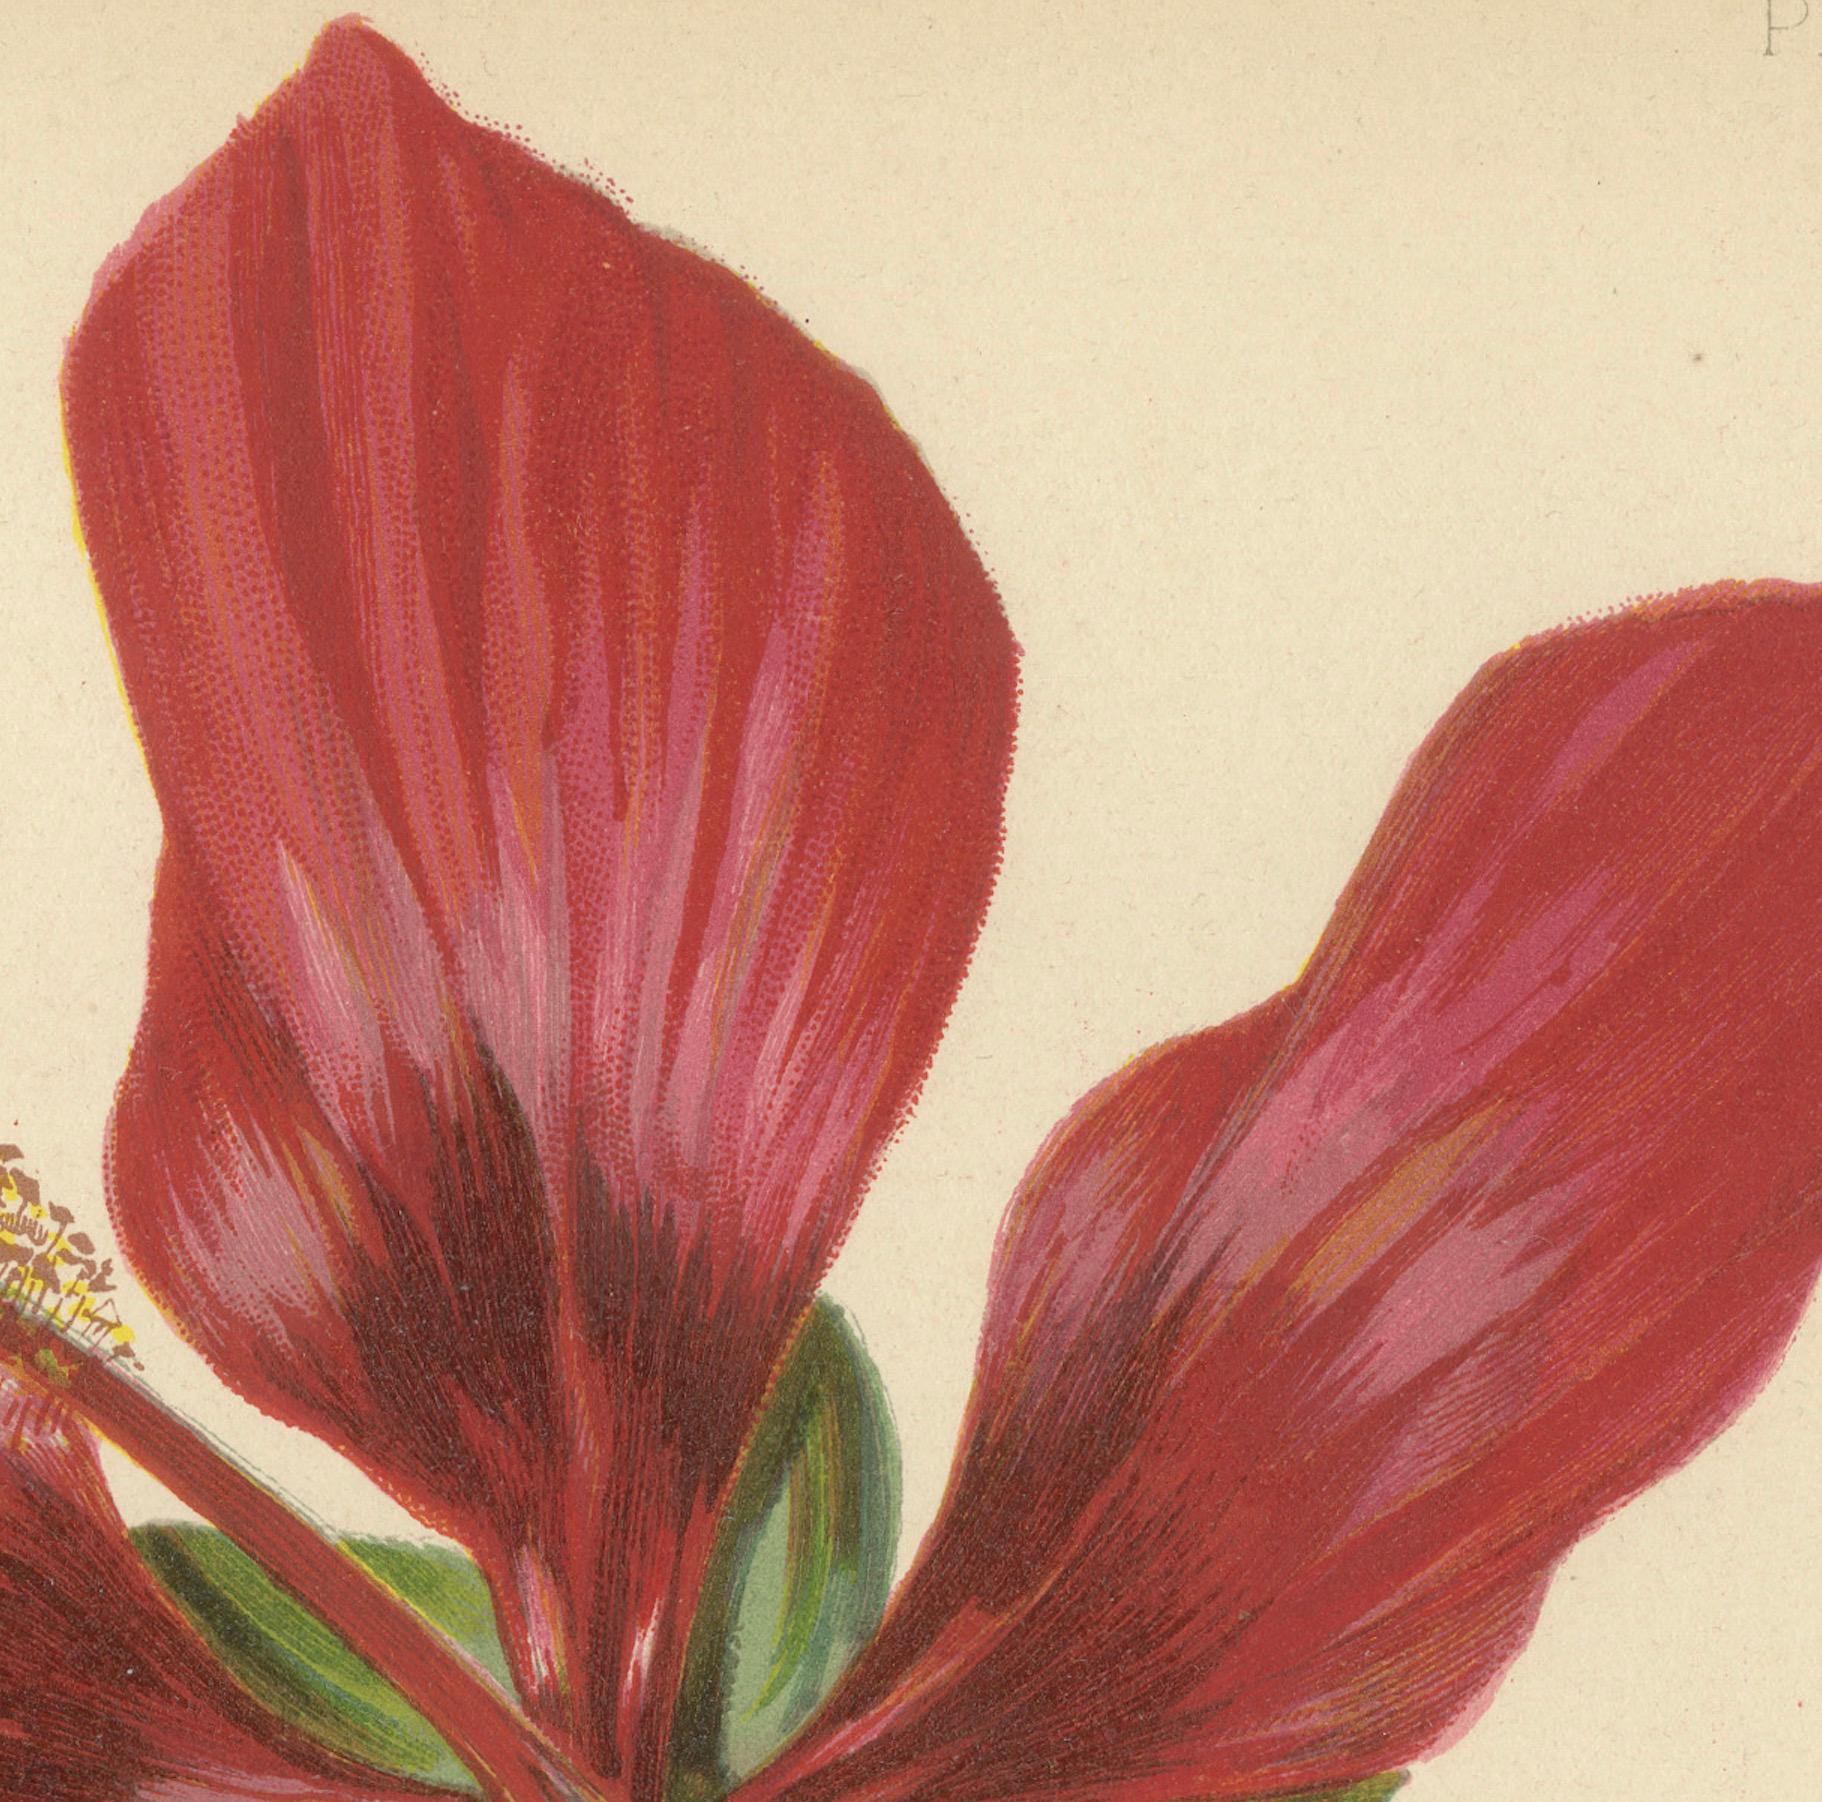 Scarlet Rosemallow aus The Native Flowers and Ferns of the United States, 1879 im Zustand „Gut“ im Angebot in Langweer, NL